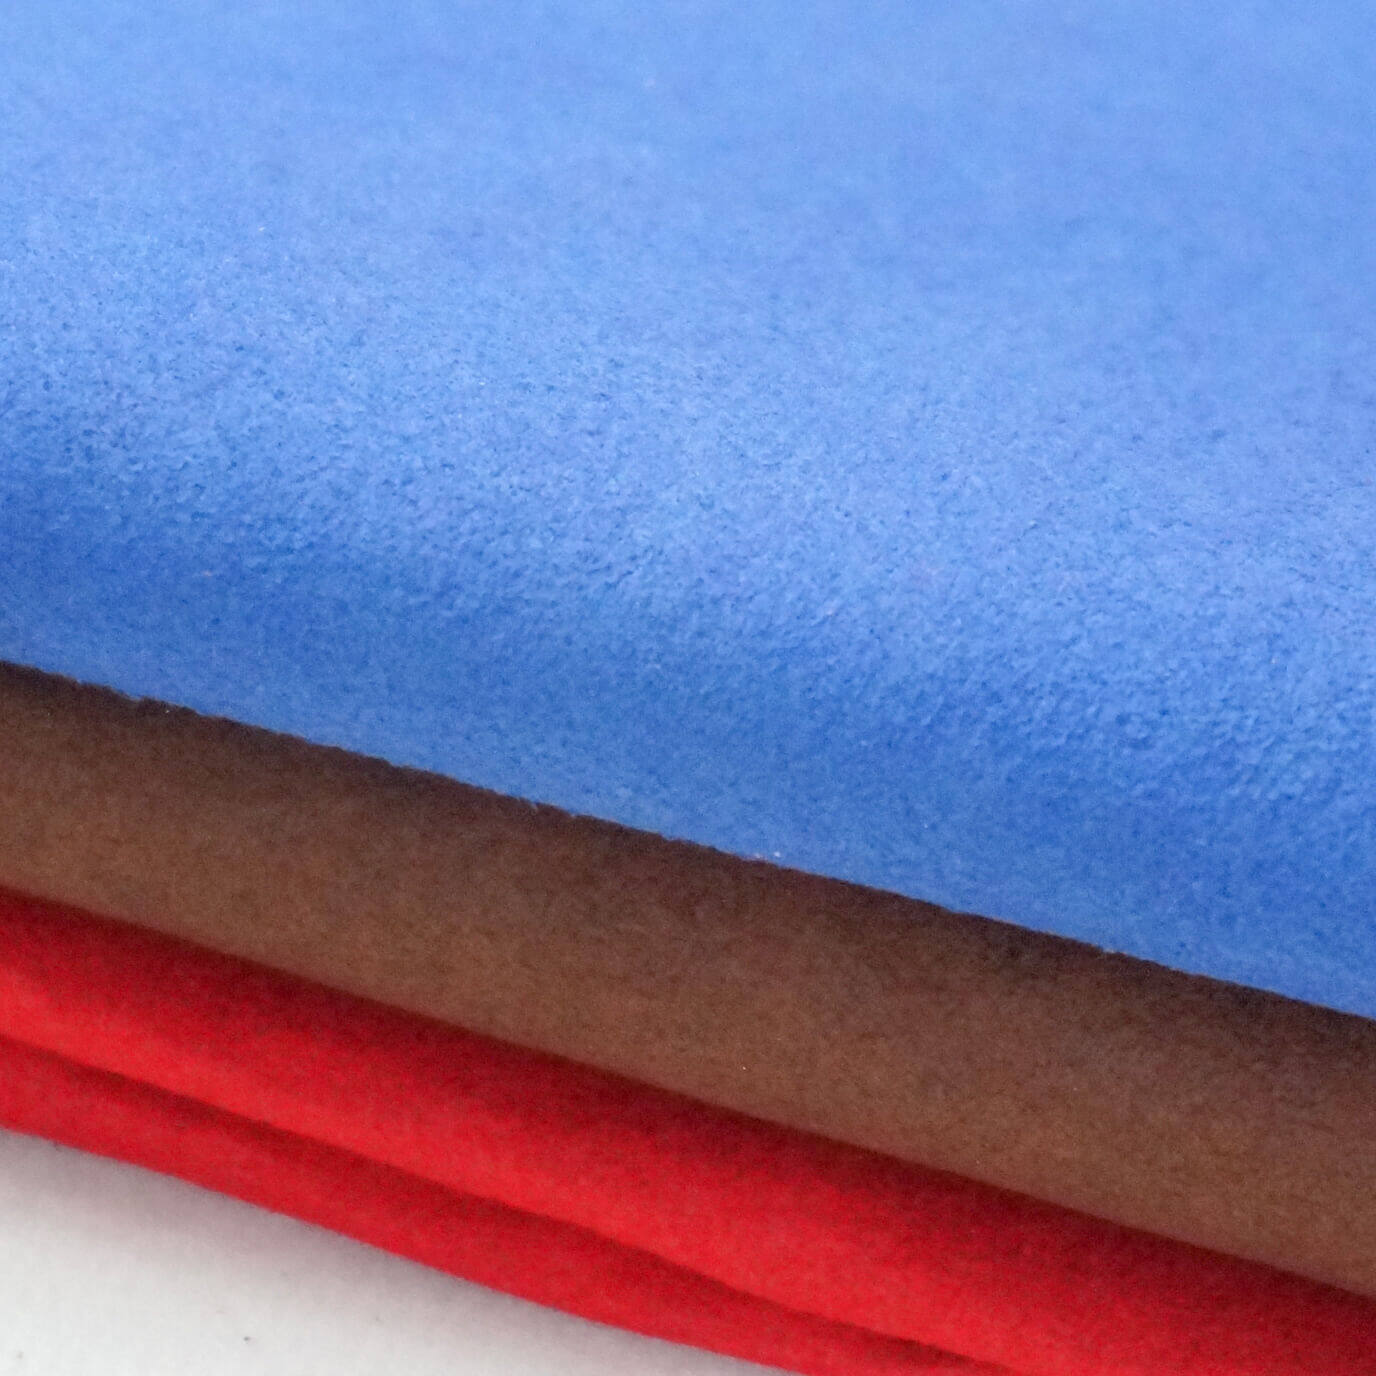 microfiber upholstery fabric for sale, microfiber ultrasuede upholstery fabric